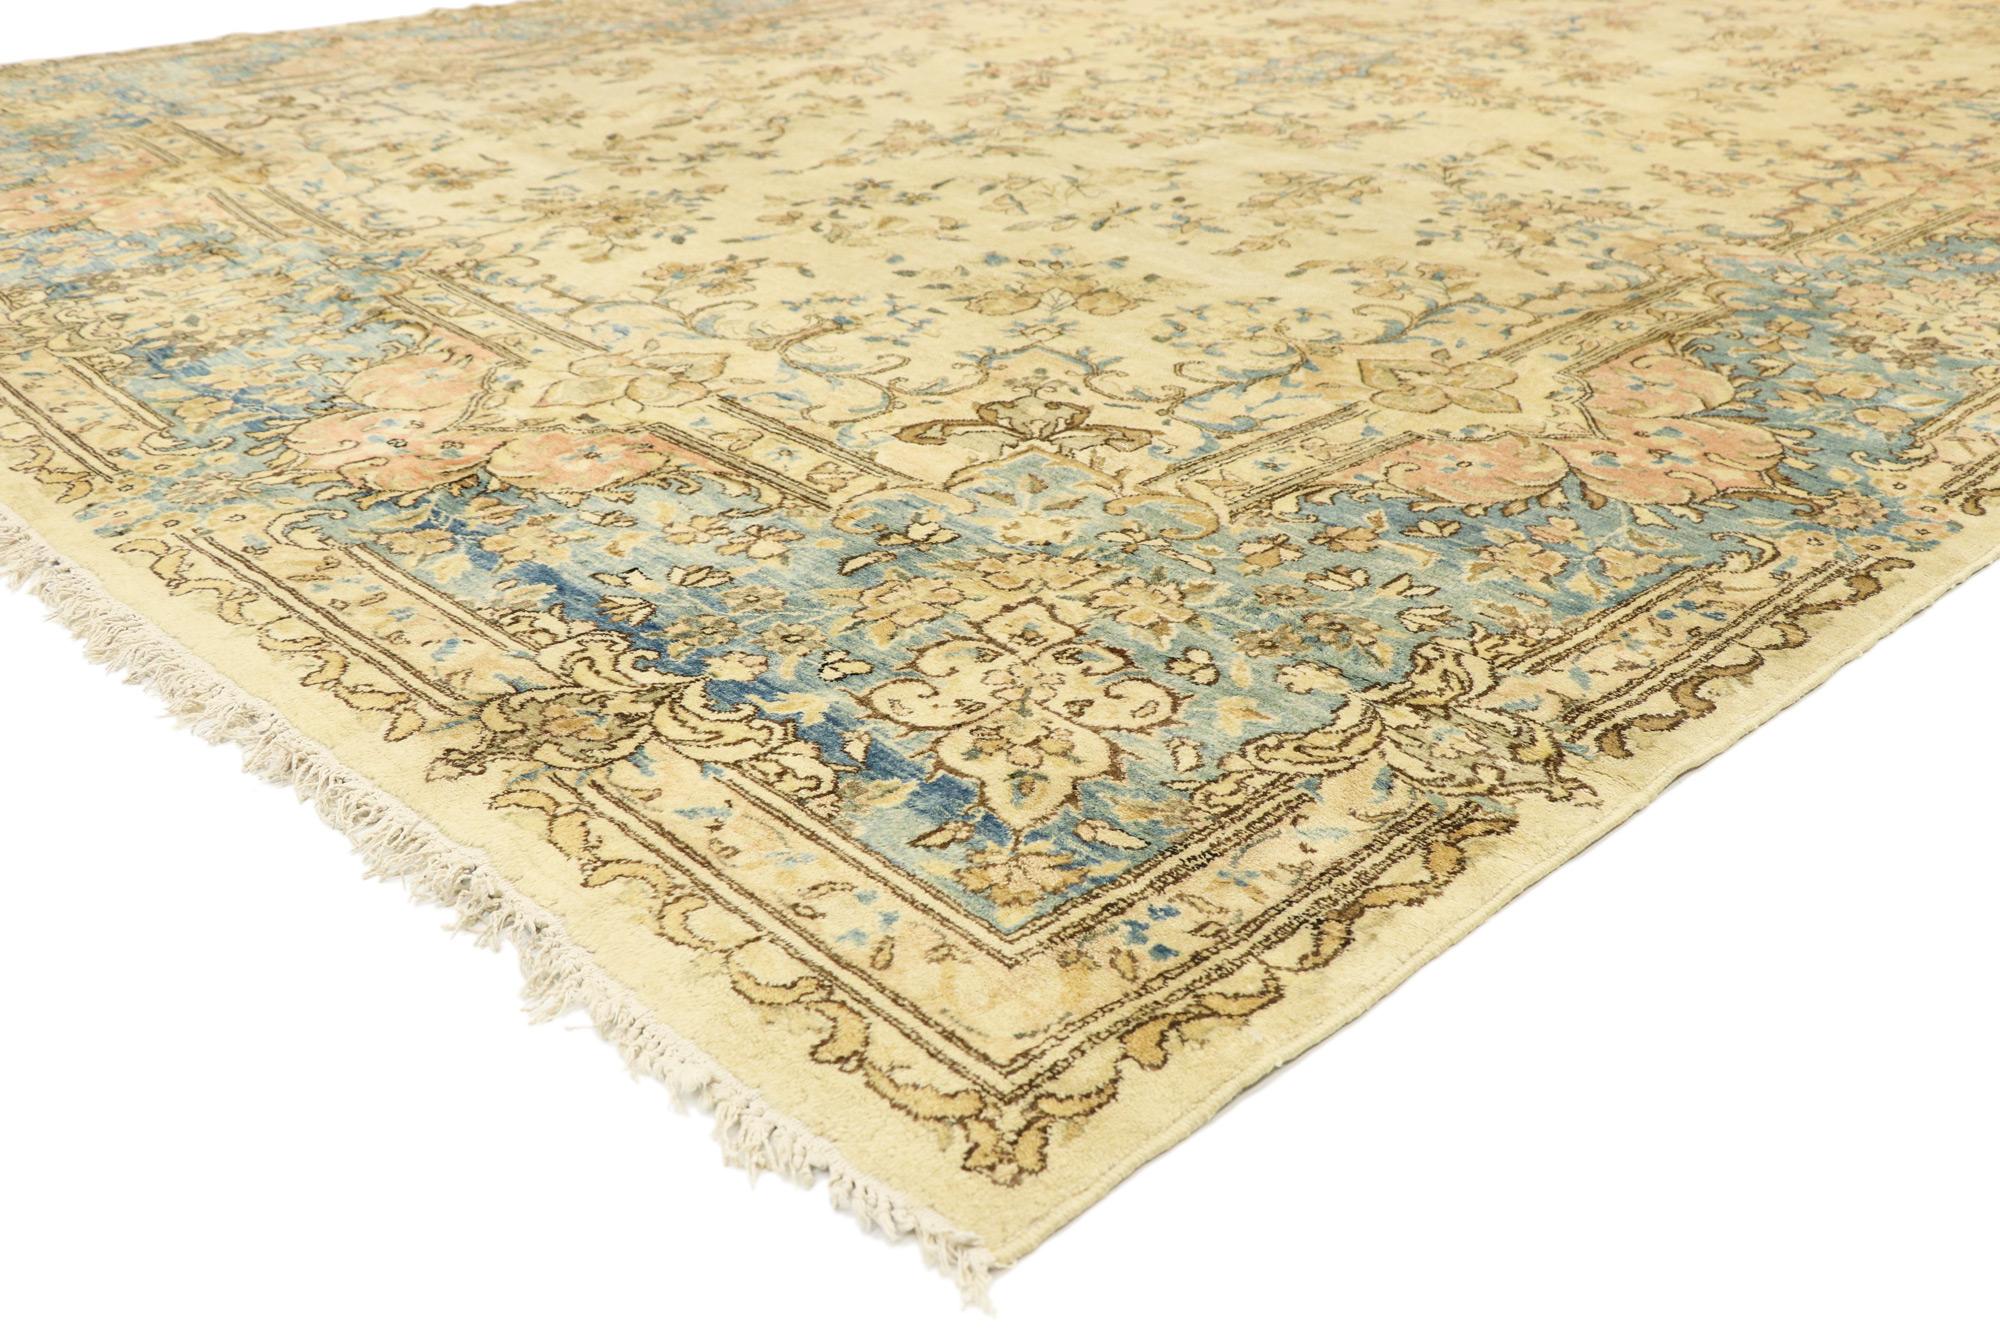 73996 Vintage Persian Kerman Rug with Rustic French Provincial Style, Persian Kirman Area Rug 08'09 X 12'06. From casual elegance to fresh and formal, relish the refinement in this hand-knotted wool vintage Persian Kerman rug (Kirman) rug. Its soft